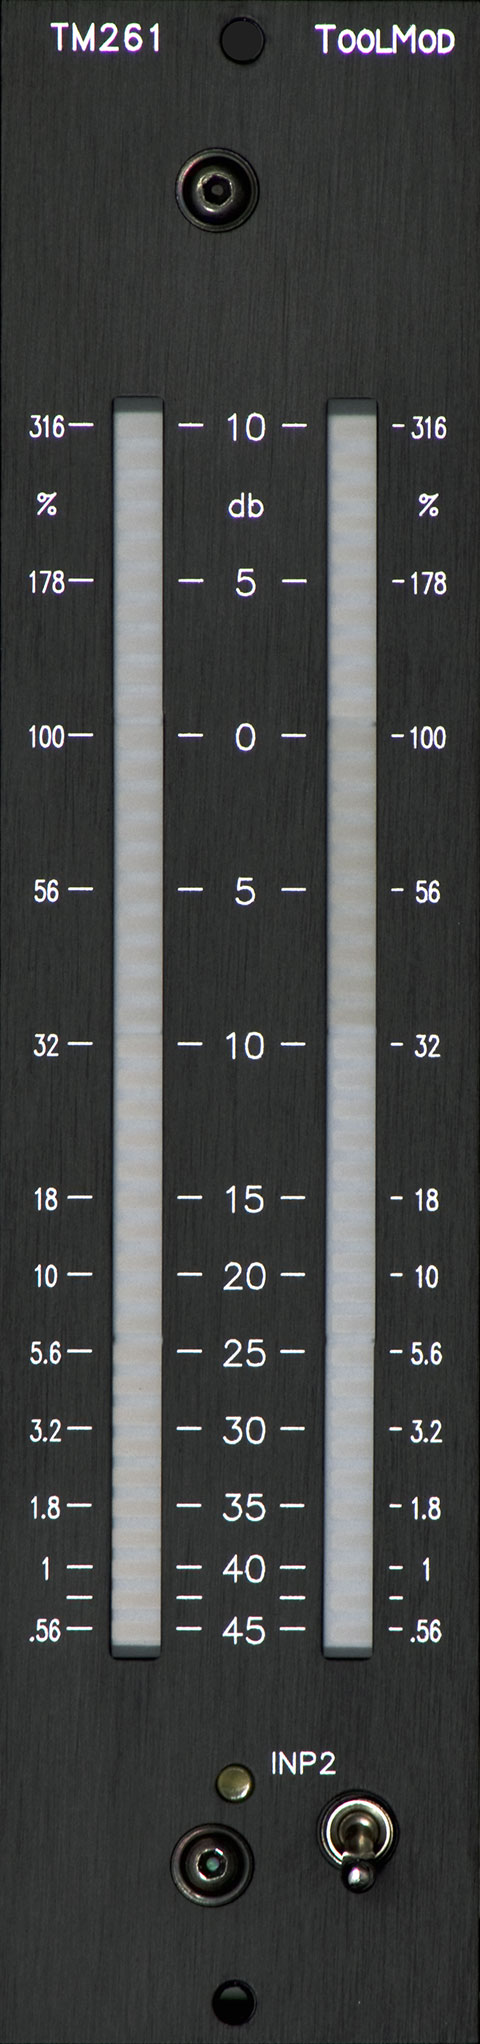 Stereo Peakmeter with +5 to -40 dB Range, vertical Version